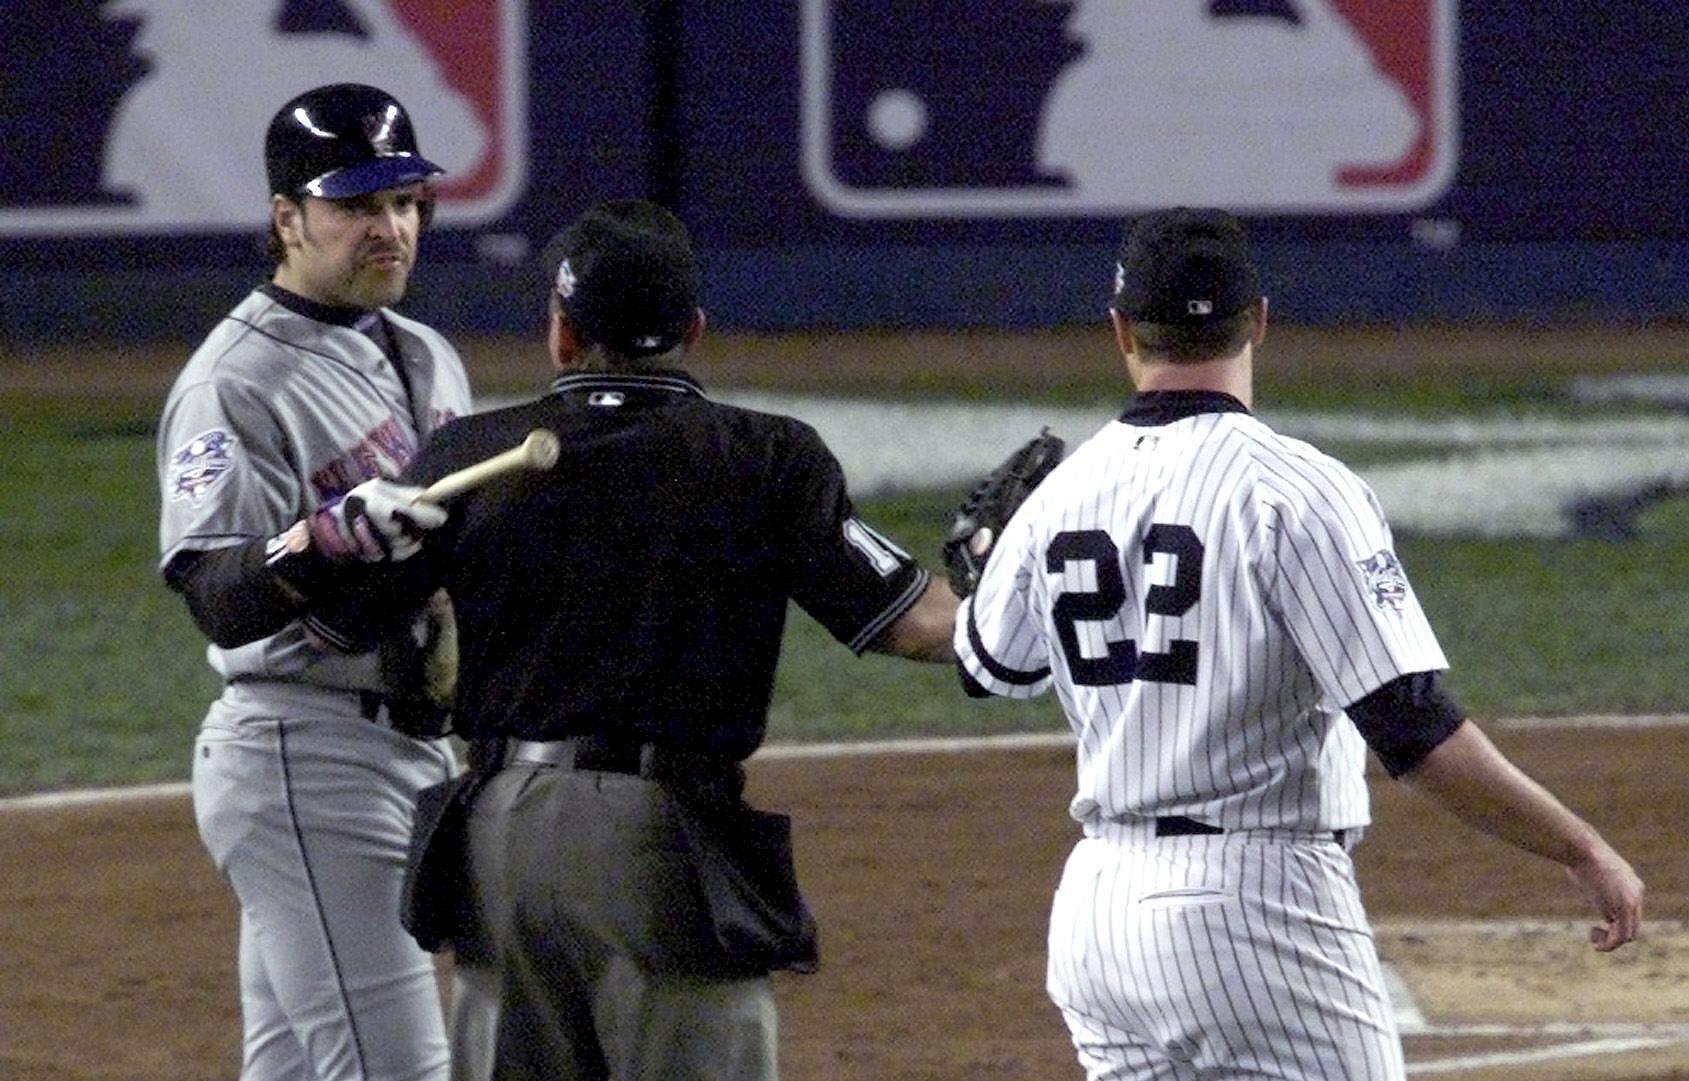 Roger Clemens agrees to fight Mike Piazza for charity 🥊 #mlb